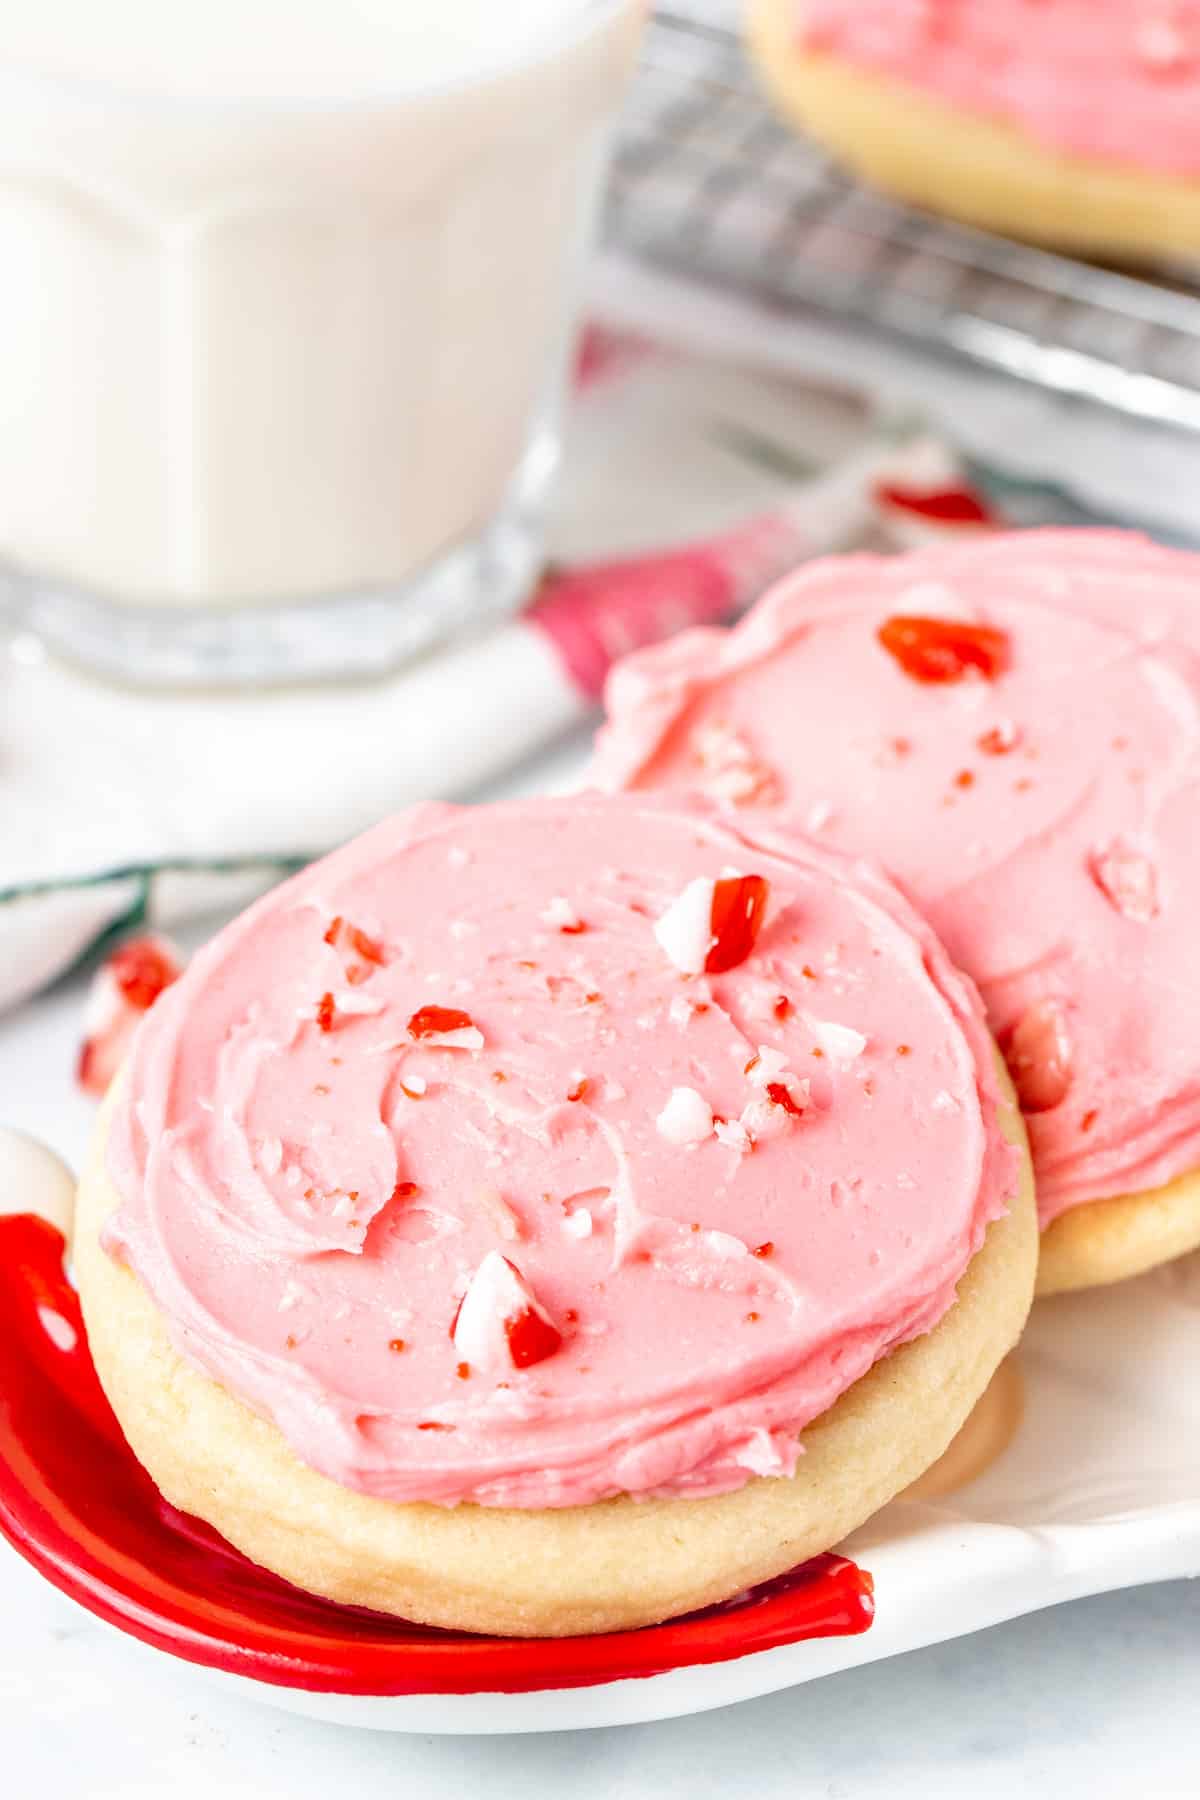 Plate of peppermint sugar cookies with glass of milk